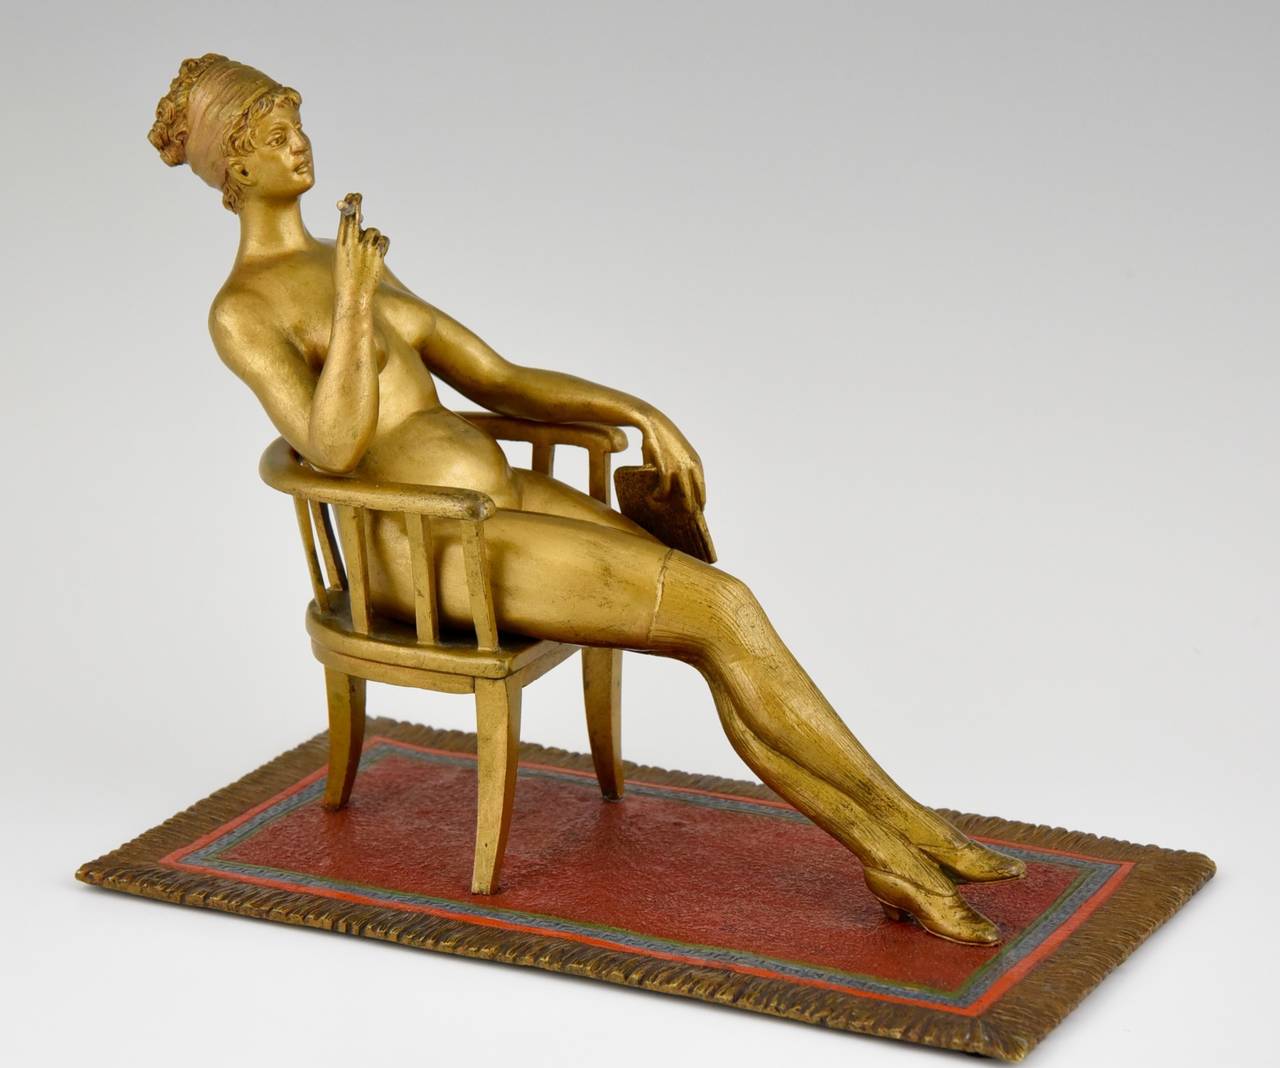 Erotic cold painted Vienna bronze, nude sitting in a chair smoking a cigarette on an oriental carpet.

Literature:
A similar model is illustrated on page 167 “Bronzes de Vienne” by Ernest Hrabalek, les éditions de l'amateur.
More information